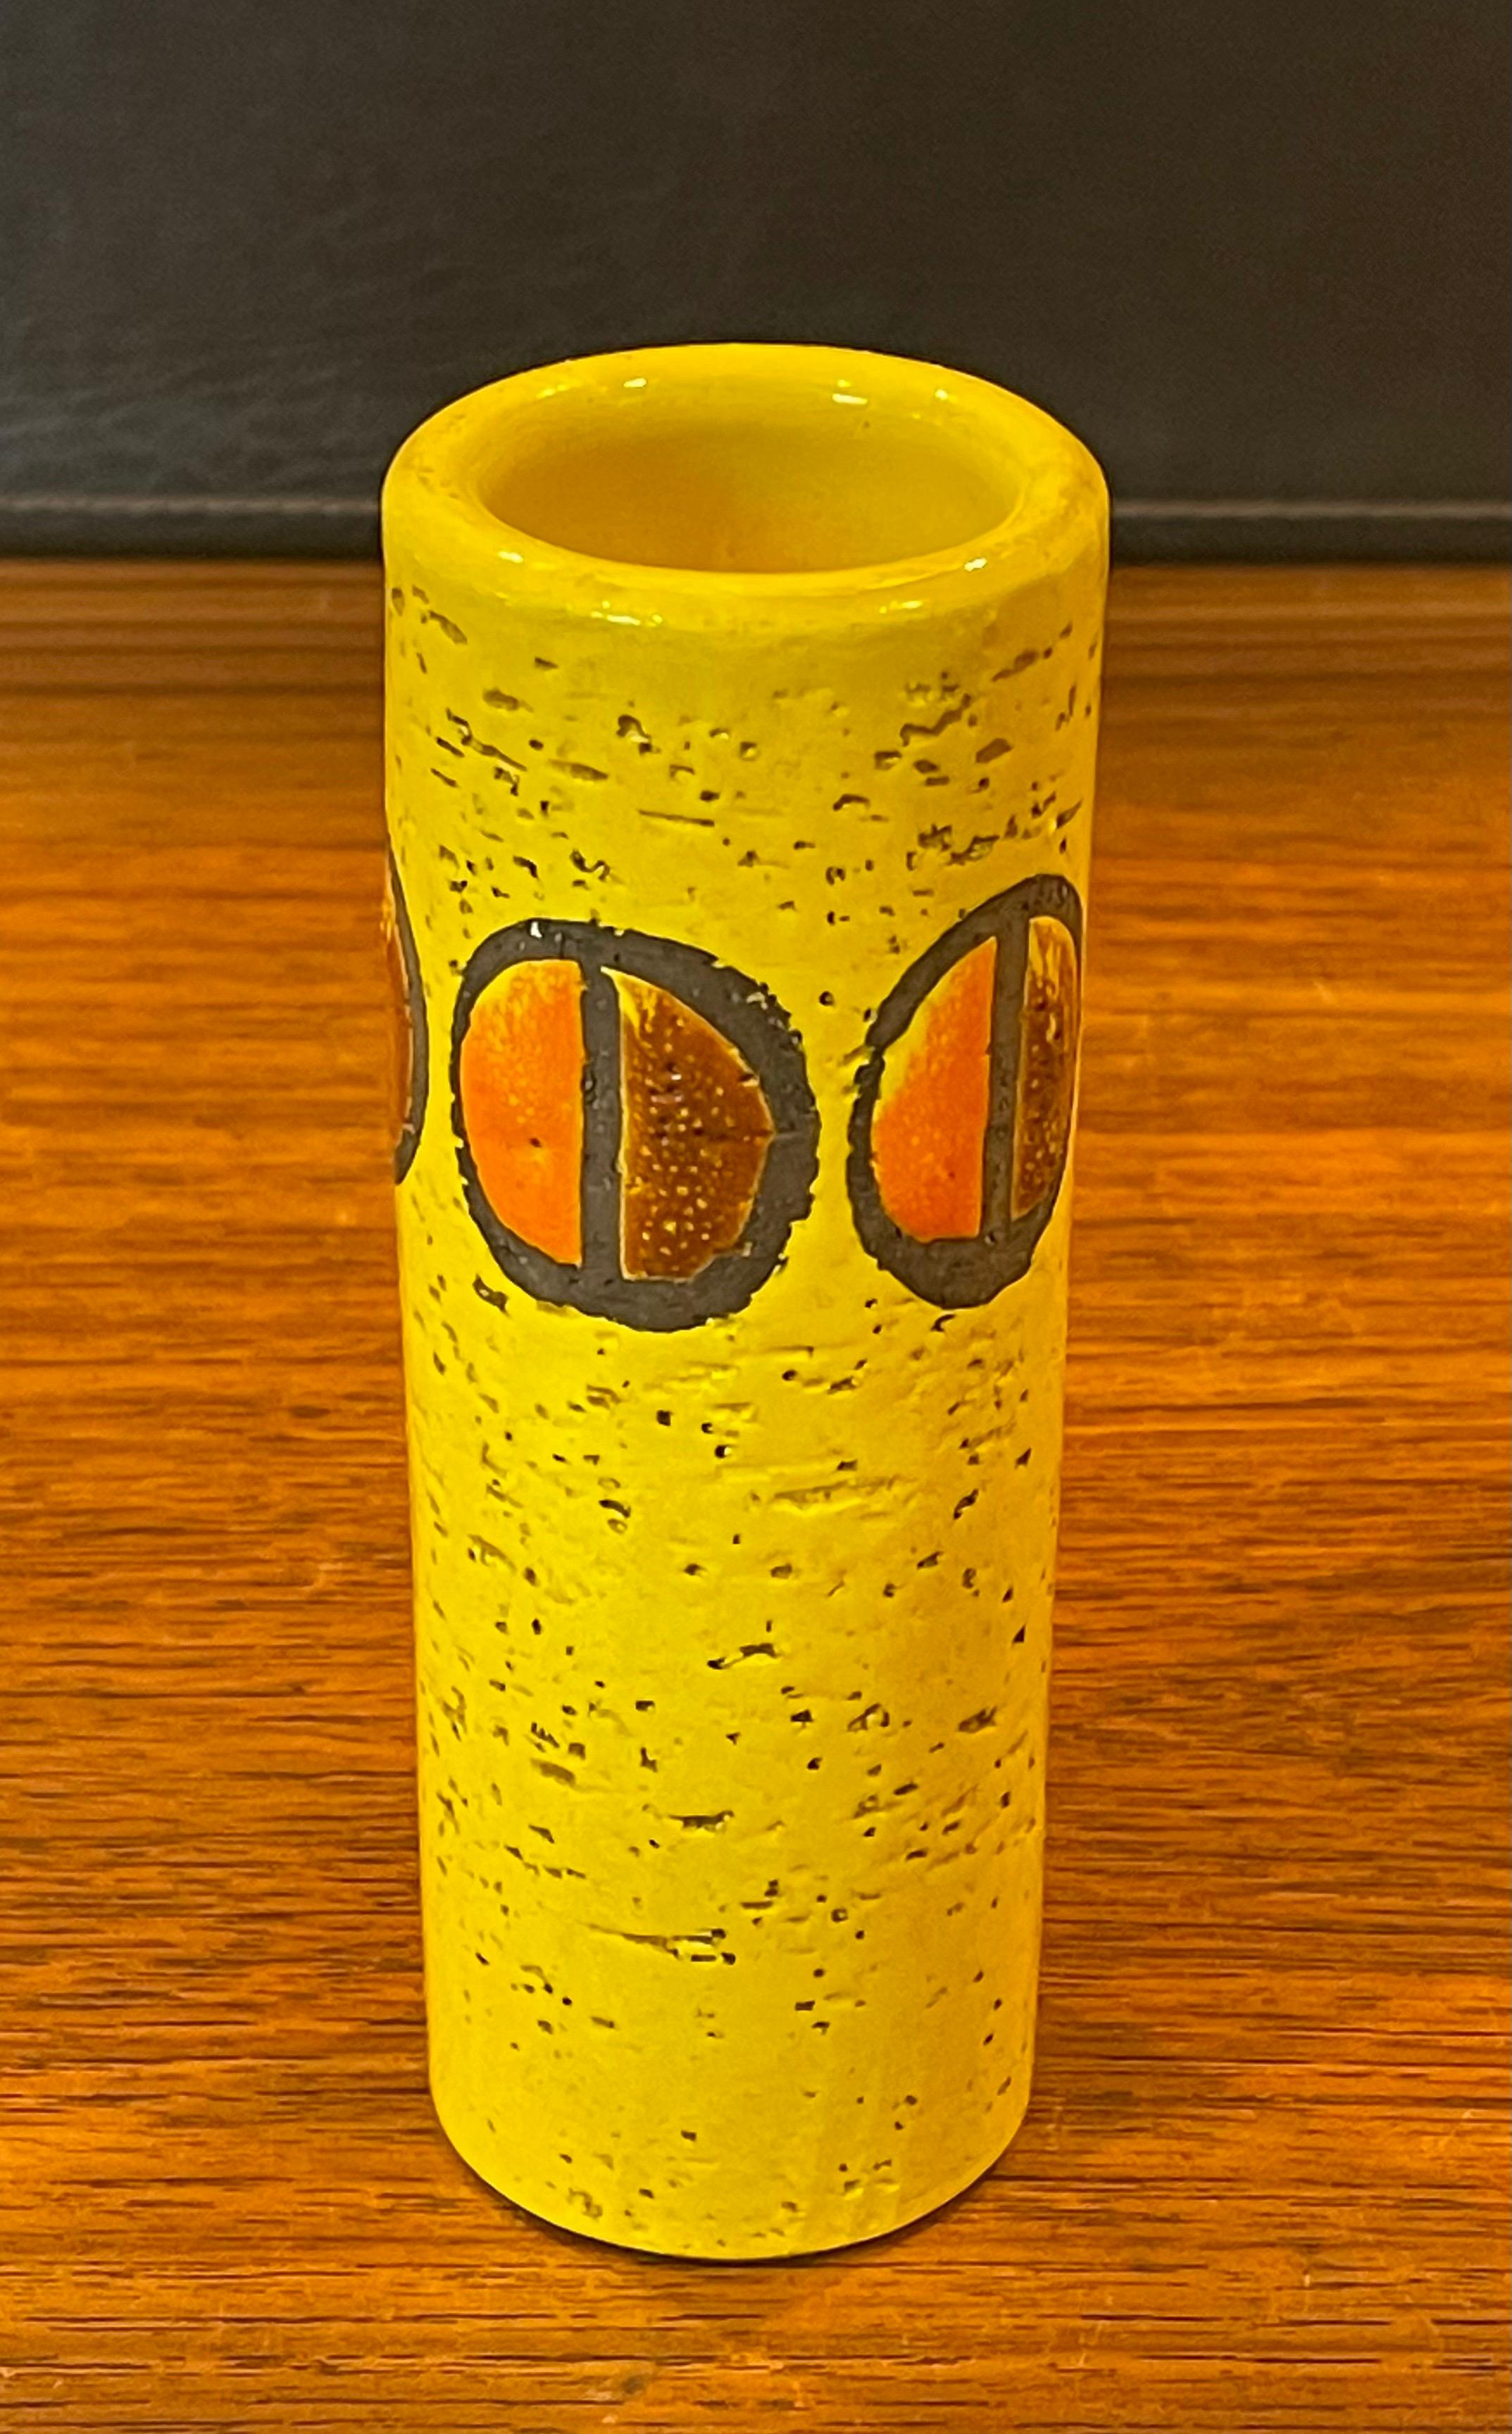 Beautiful MCM Bitossi petite yellow vase by Rosenthal Netter, circa 1960s. The hand thrown vase is in great vintage condition with no chips or cracks; it measures 2.25